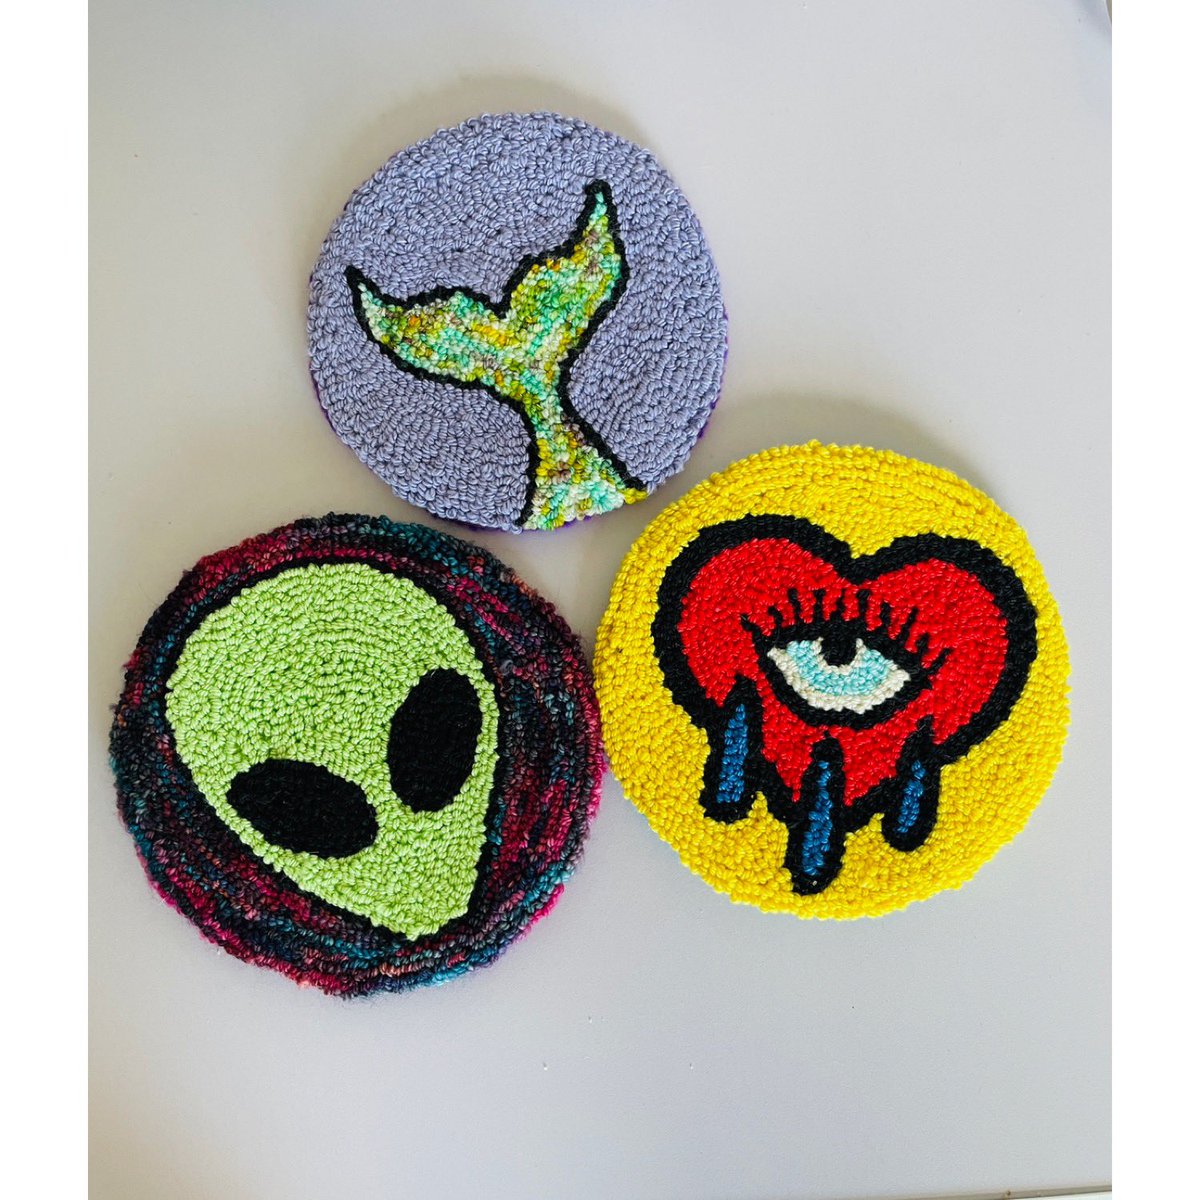 I haven’t posted anything yarny in ages, actually I’ve not posted anything at all in ages. I will get back to designing soon but in the meantime I’m just gonna leave my punch needle coasters here. Love making these #mhhsbd #punchneedle #yarn